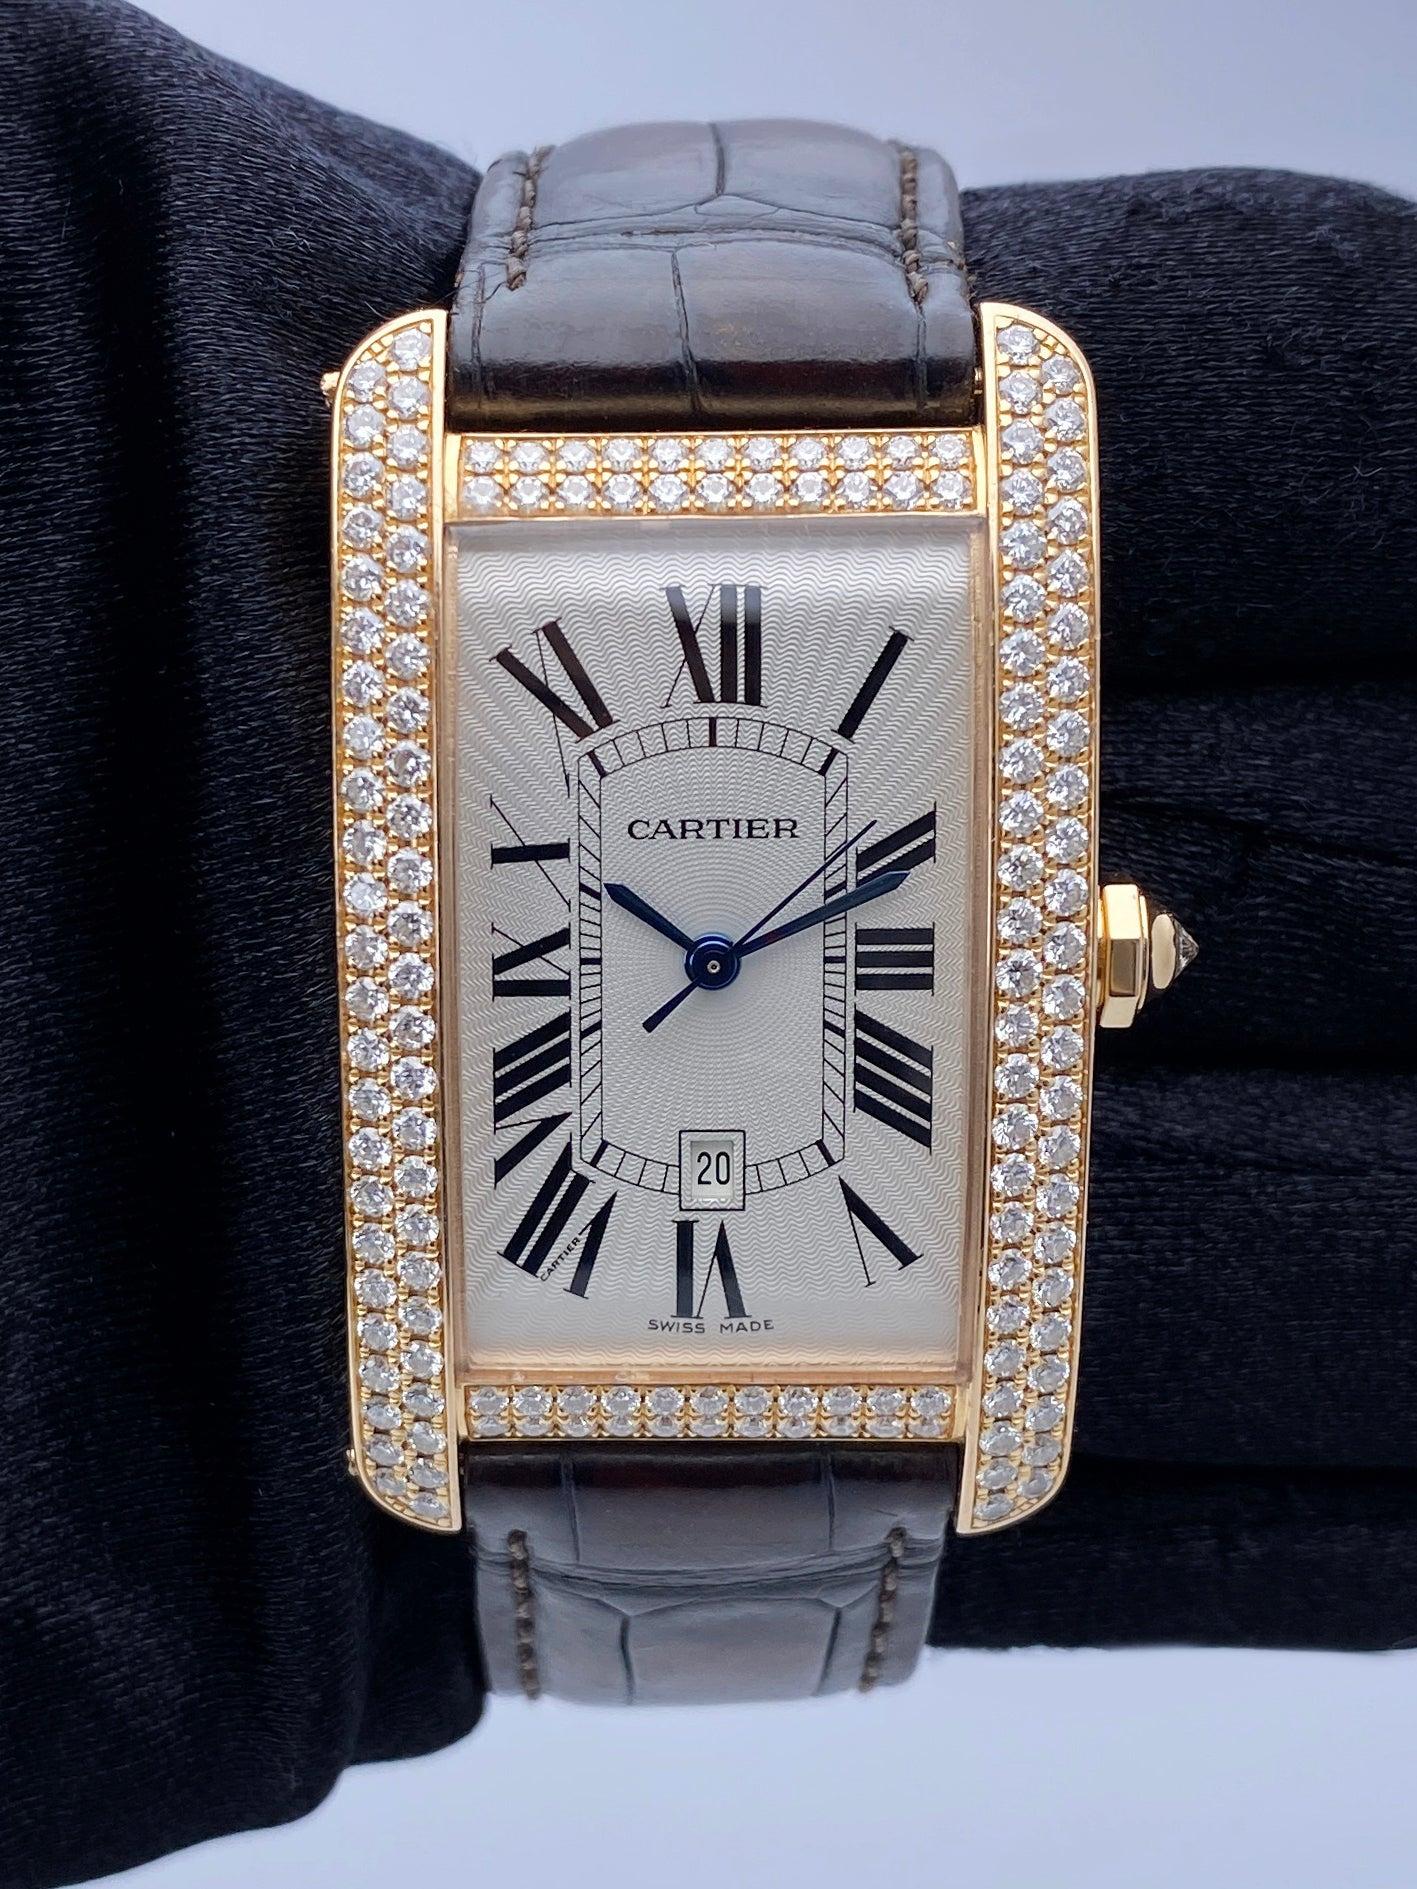 Cartier Tank Americaine WB704851 / 2505 Watch. 27mm 18K rose gold case with factory diamond set. Silver dial with blue hands and black Roman numeral hour marker. Date display at 6 o'clock. Brown leather strap with 18K rose gold deployment clasp.